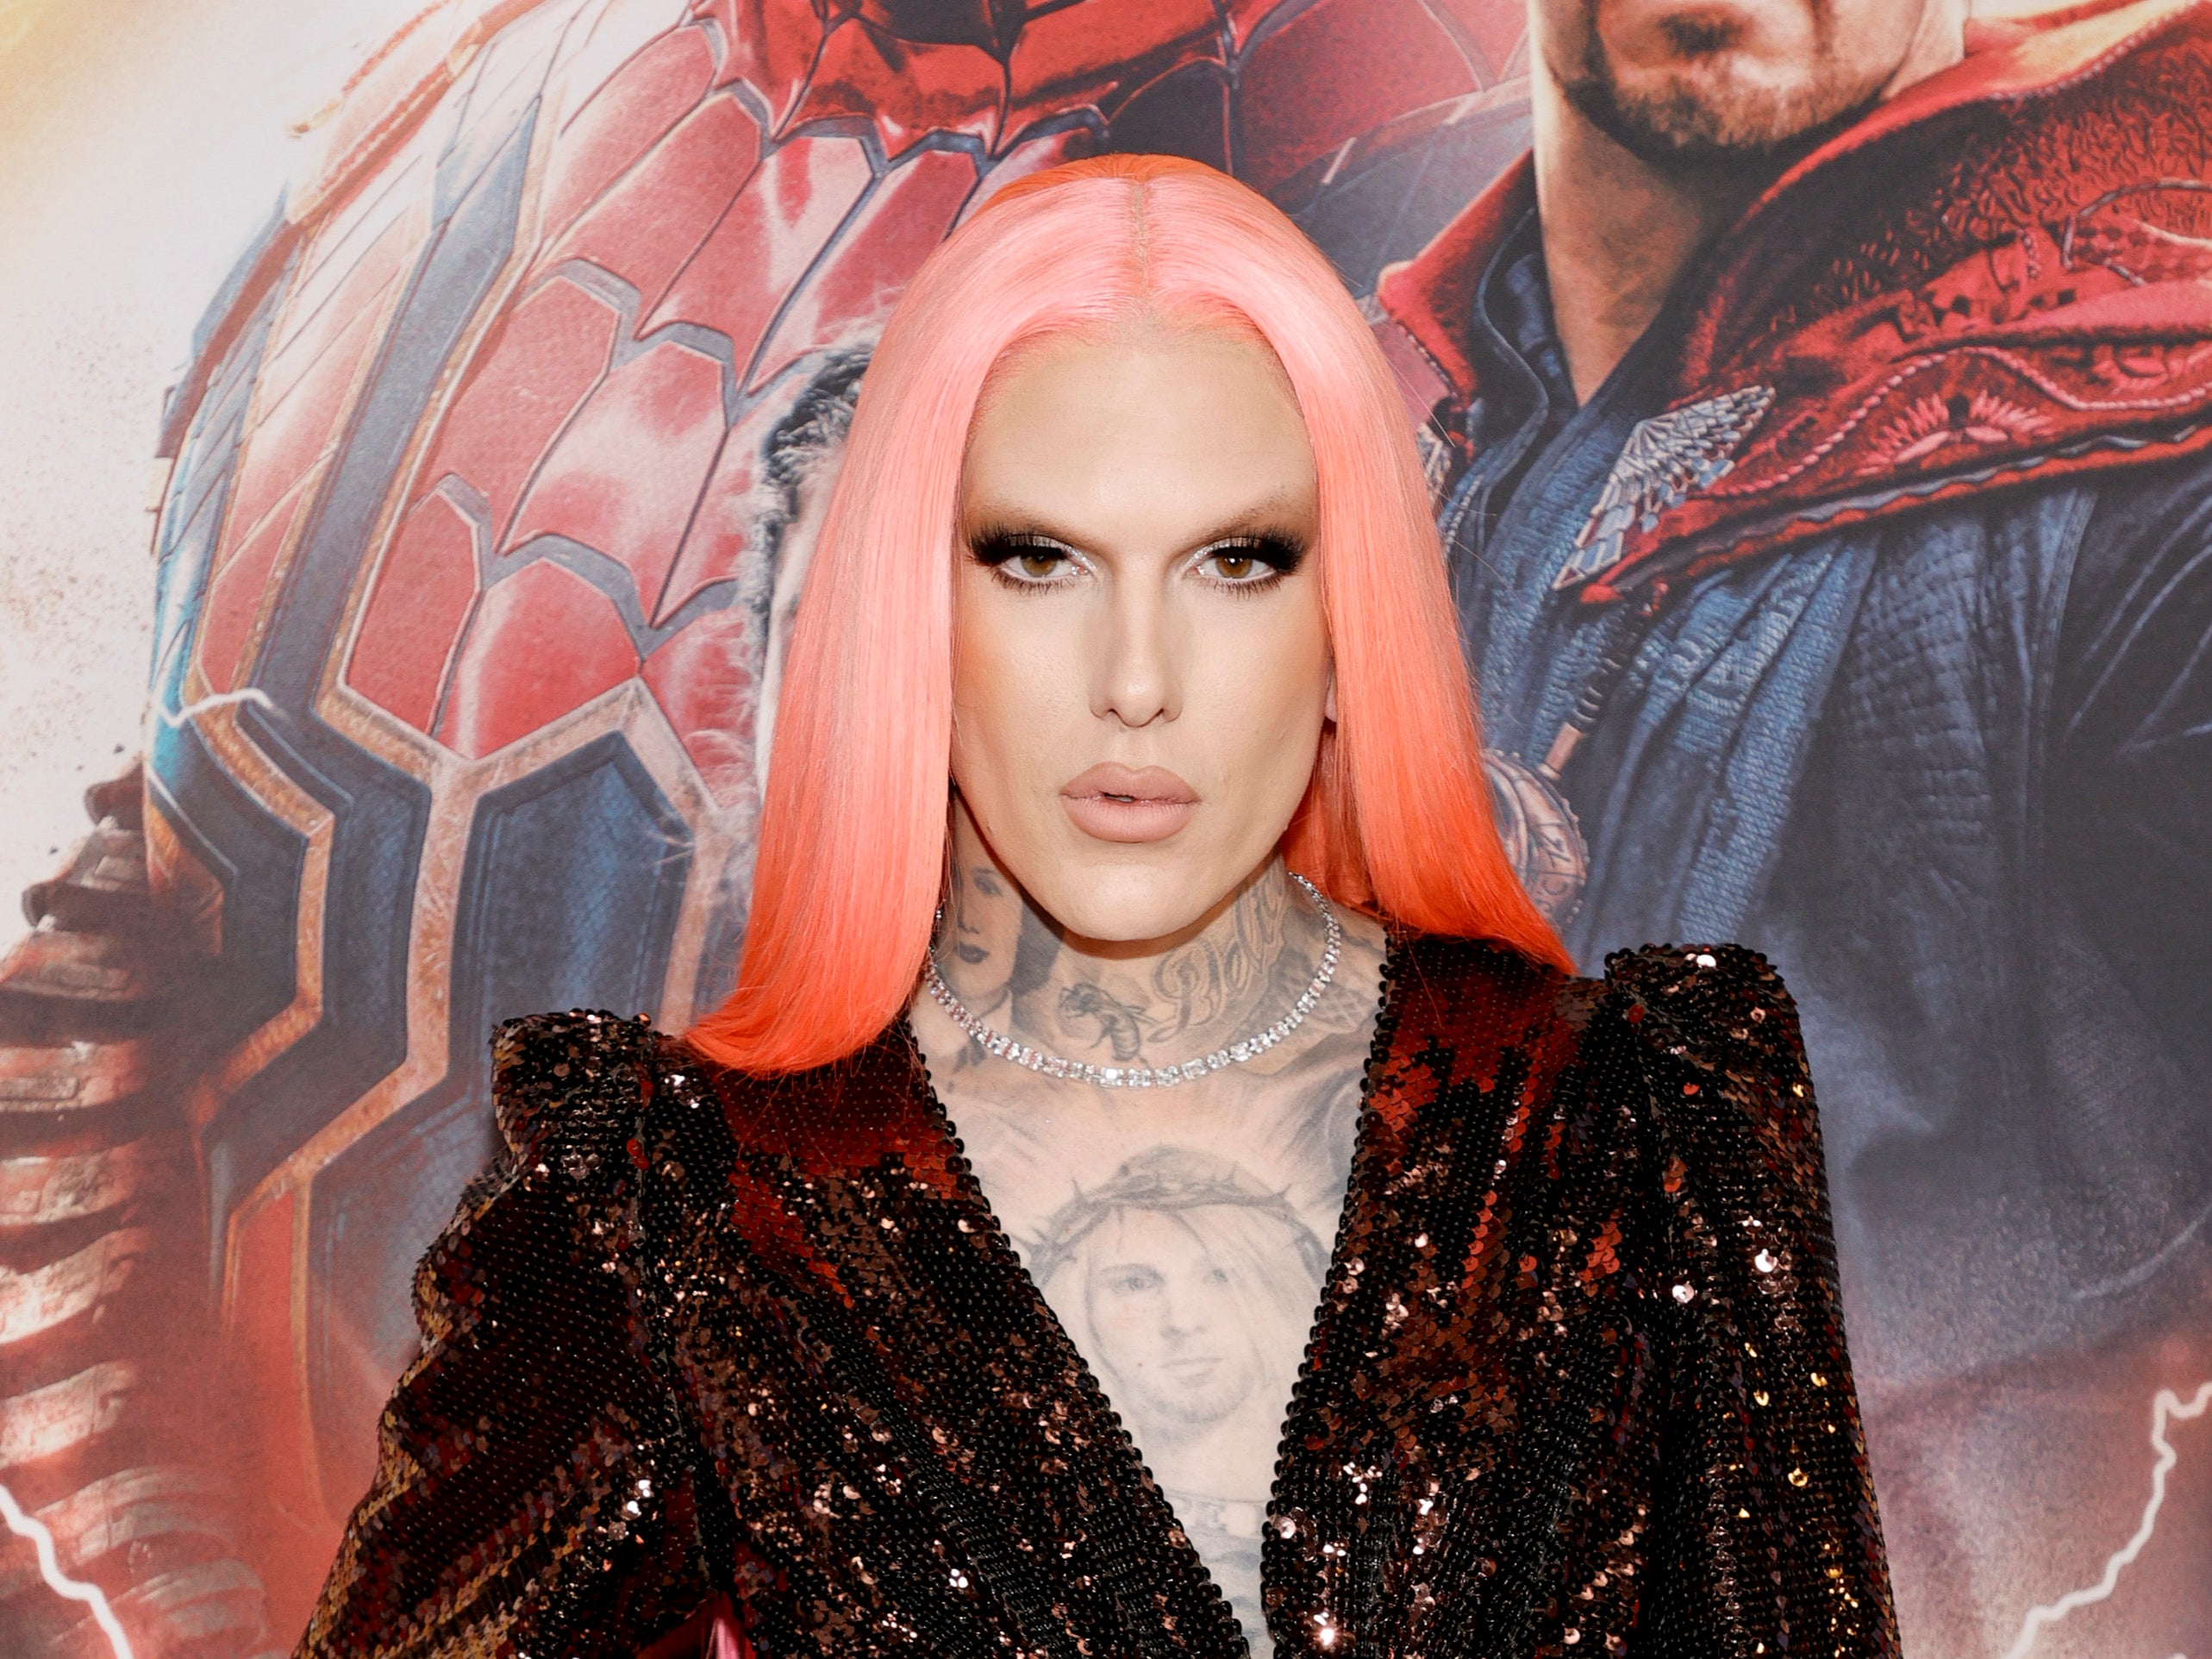 Jeffree Star is releasing a seven-product skincare line